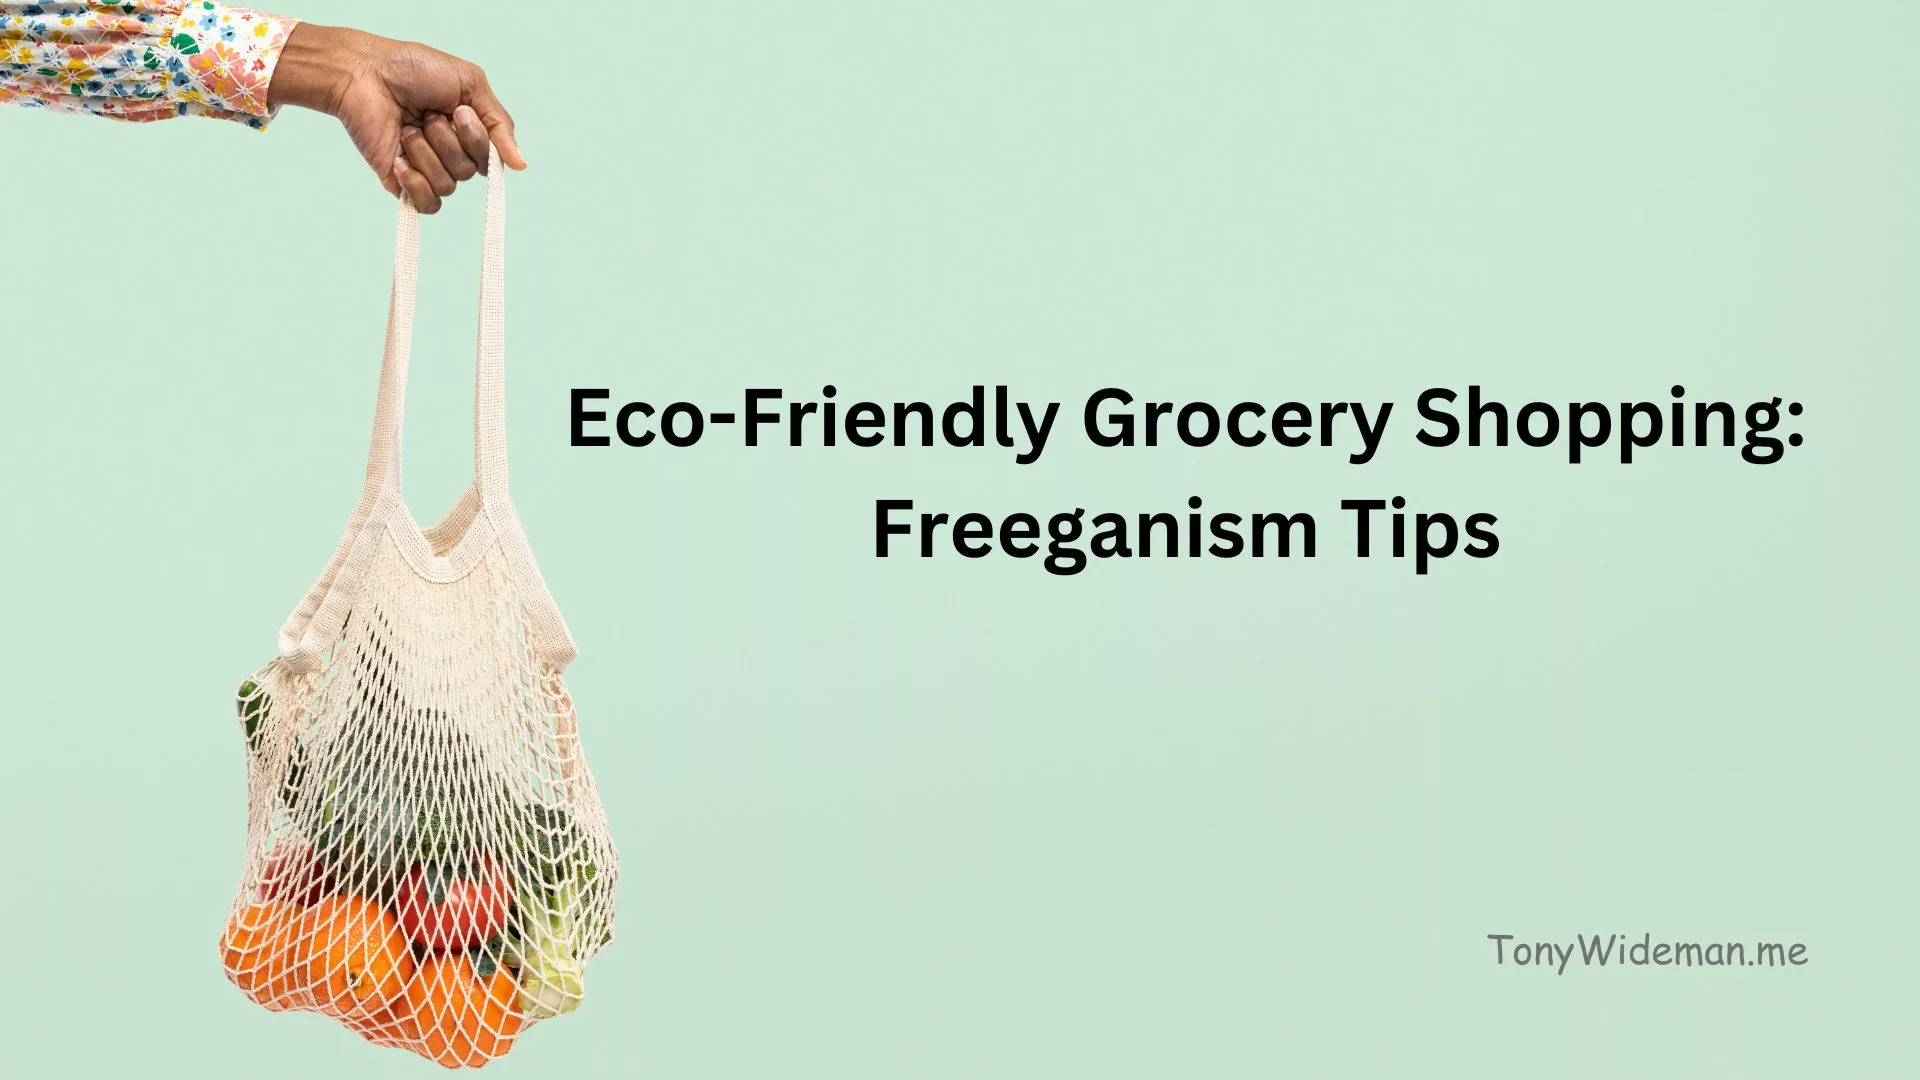 Eco-Friendly Grocery Shopping: Freeganism Tips